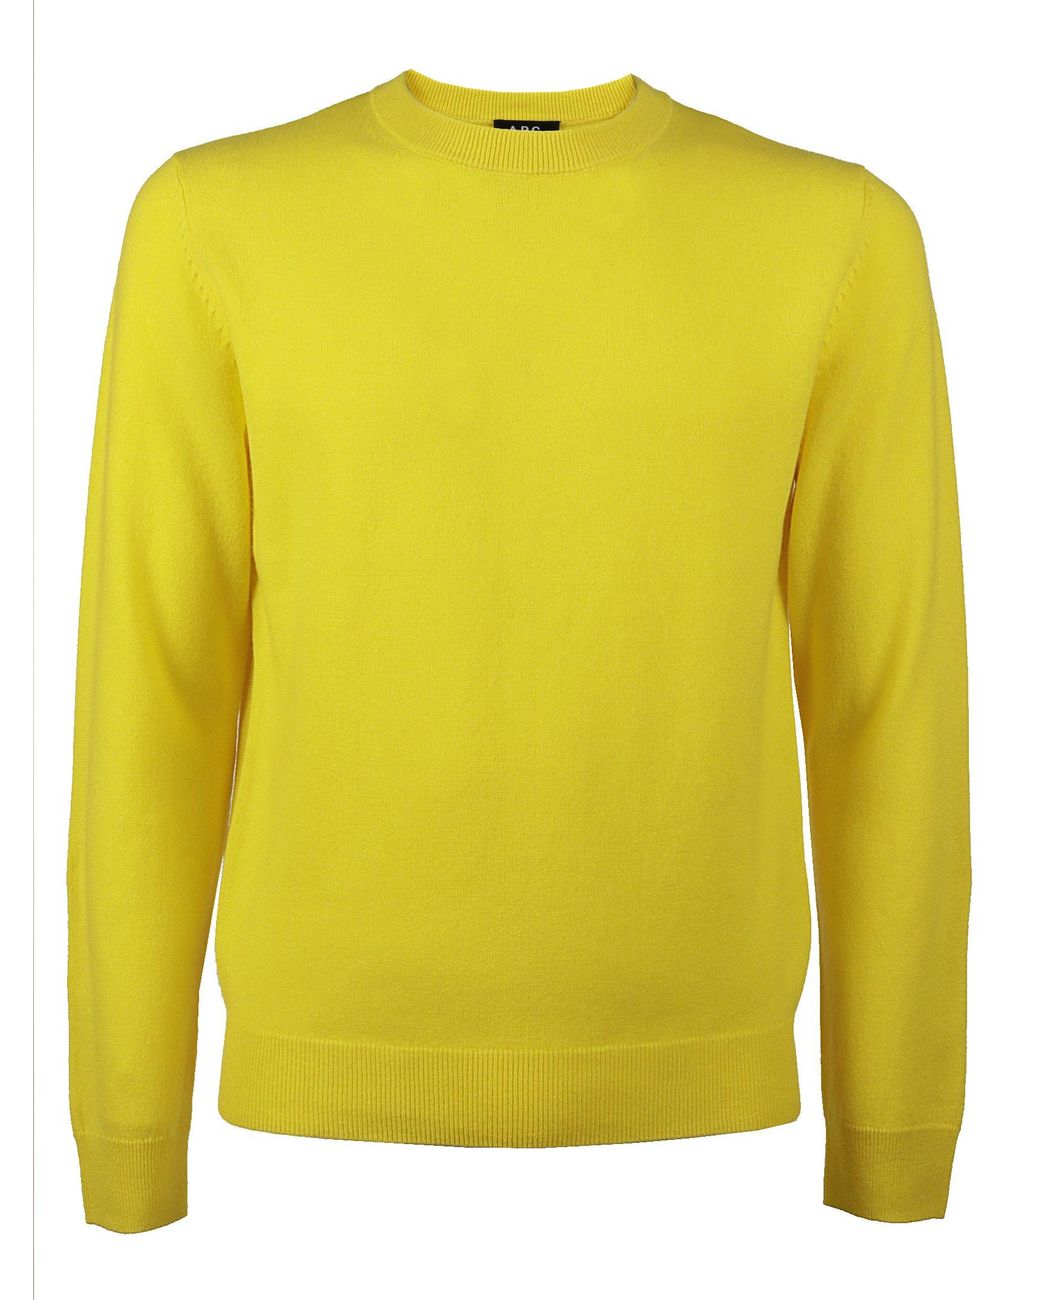 A.P.C. Cashmere Crewneck Knit Sweater in Yellow for Men - Lyst